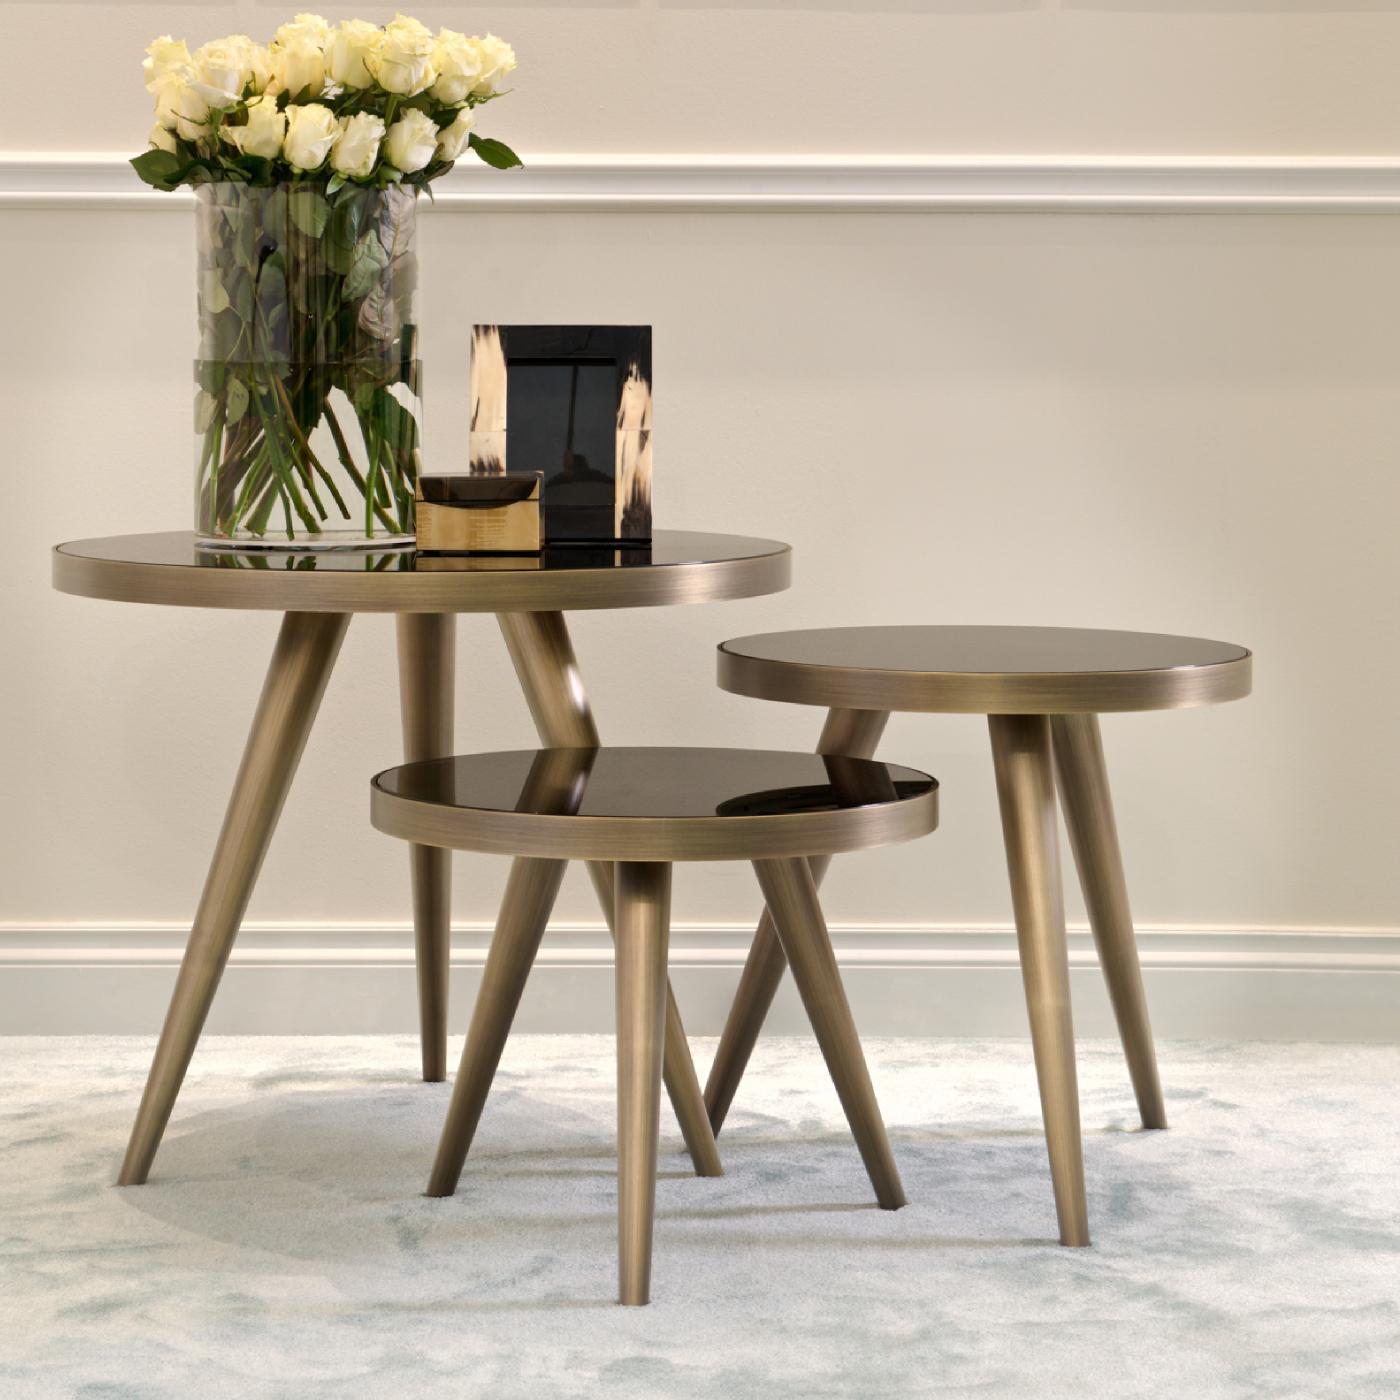 This precious set of three side tables is part of the Jerome Collection, inspired by the charm of midcentury design, crafted with exquisite craftsmanship, and using high-quality materials. Each piece features a round top in glass with a black